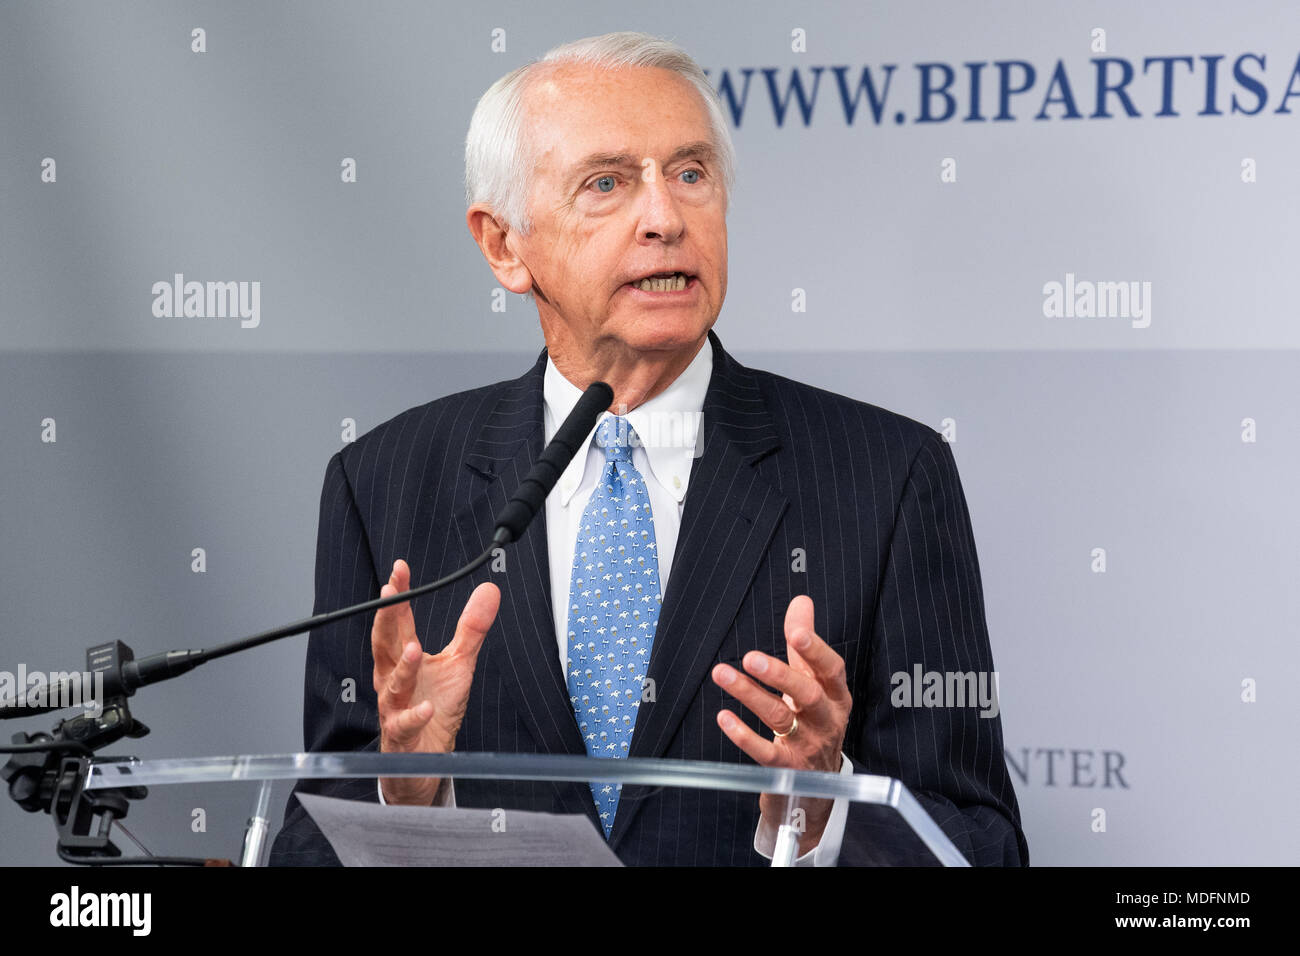 Former Kentucky Governor Steve Beshear speaking at the Restoring Our Democracy program at the Bipartisan Policy Center. Stock Photo